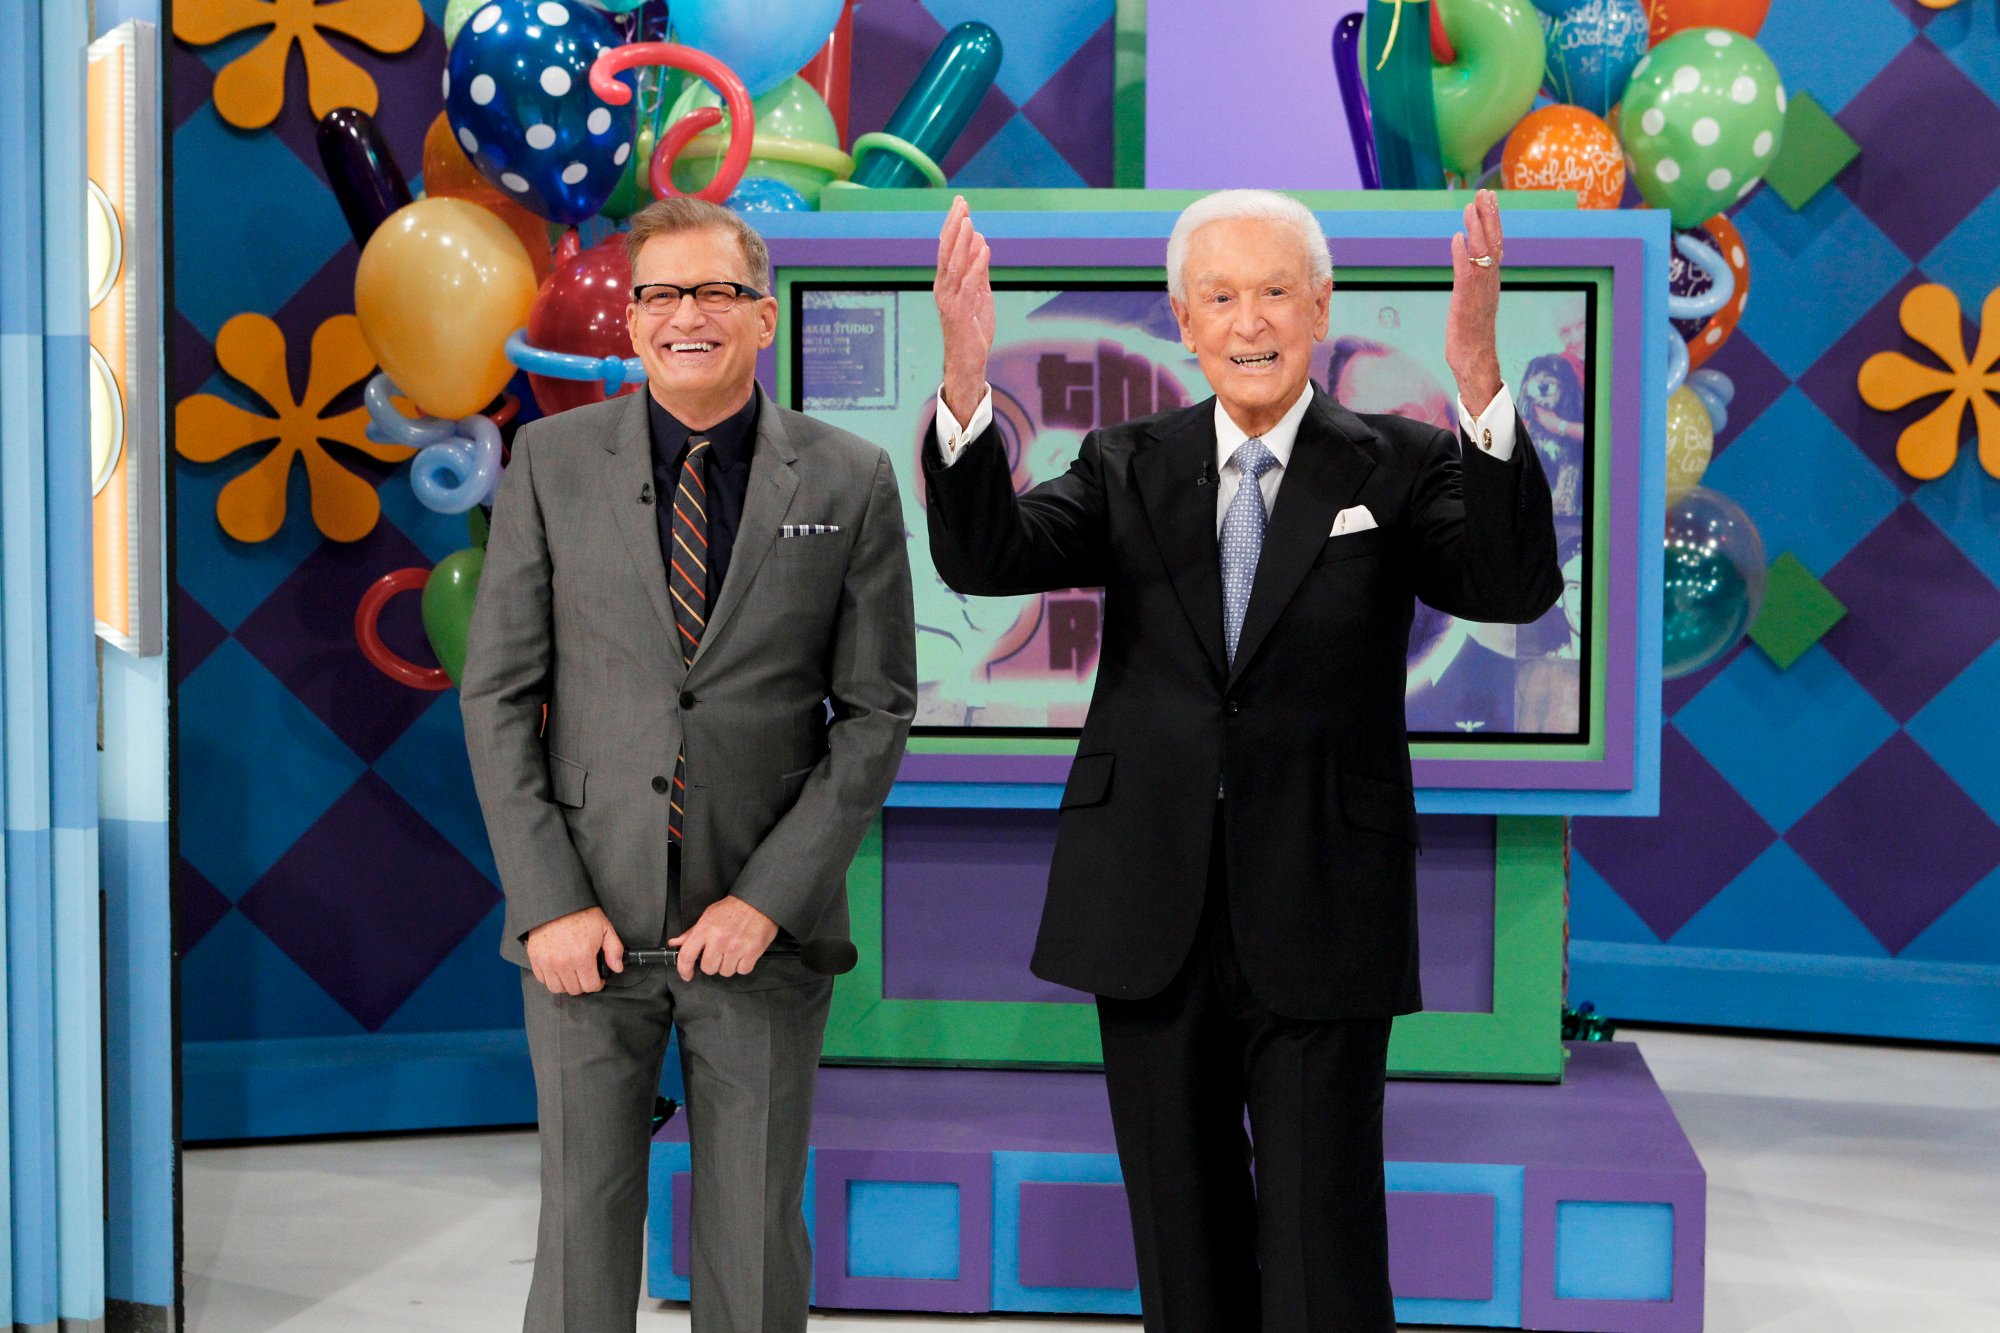 Drew Carey and Bob Barker on the set of 'The Price Is Right'